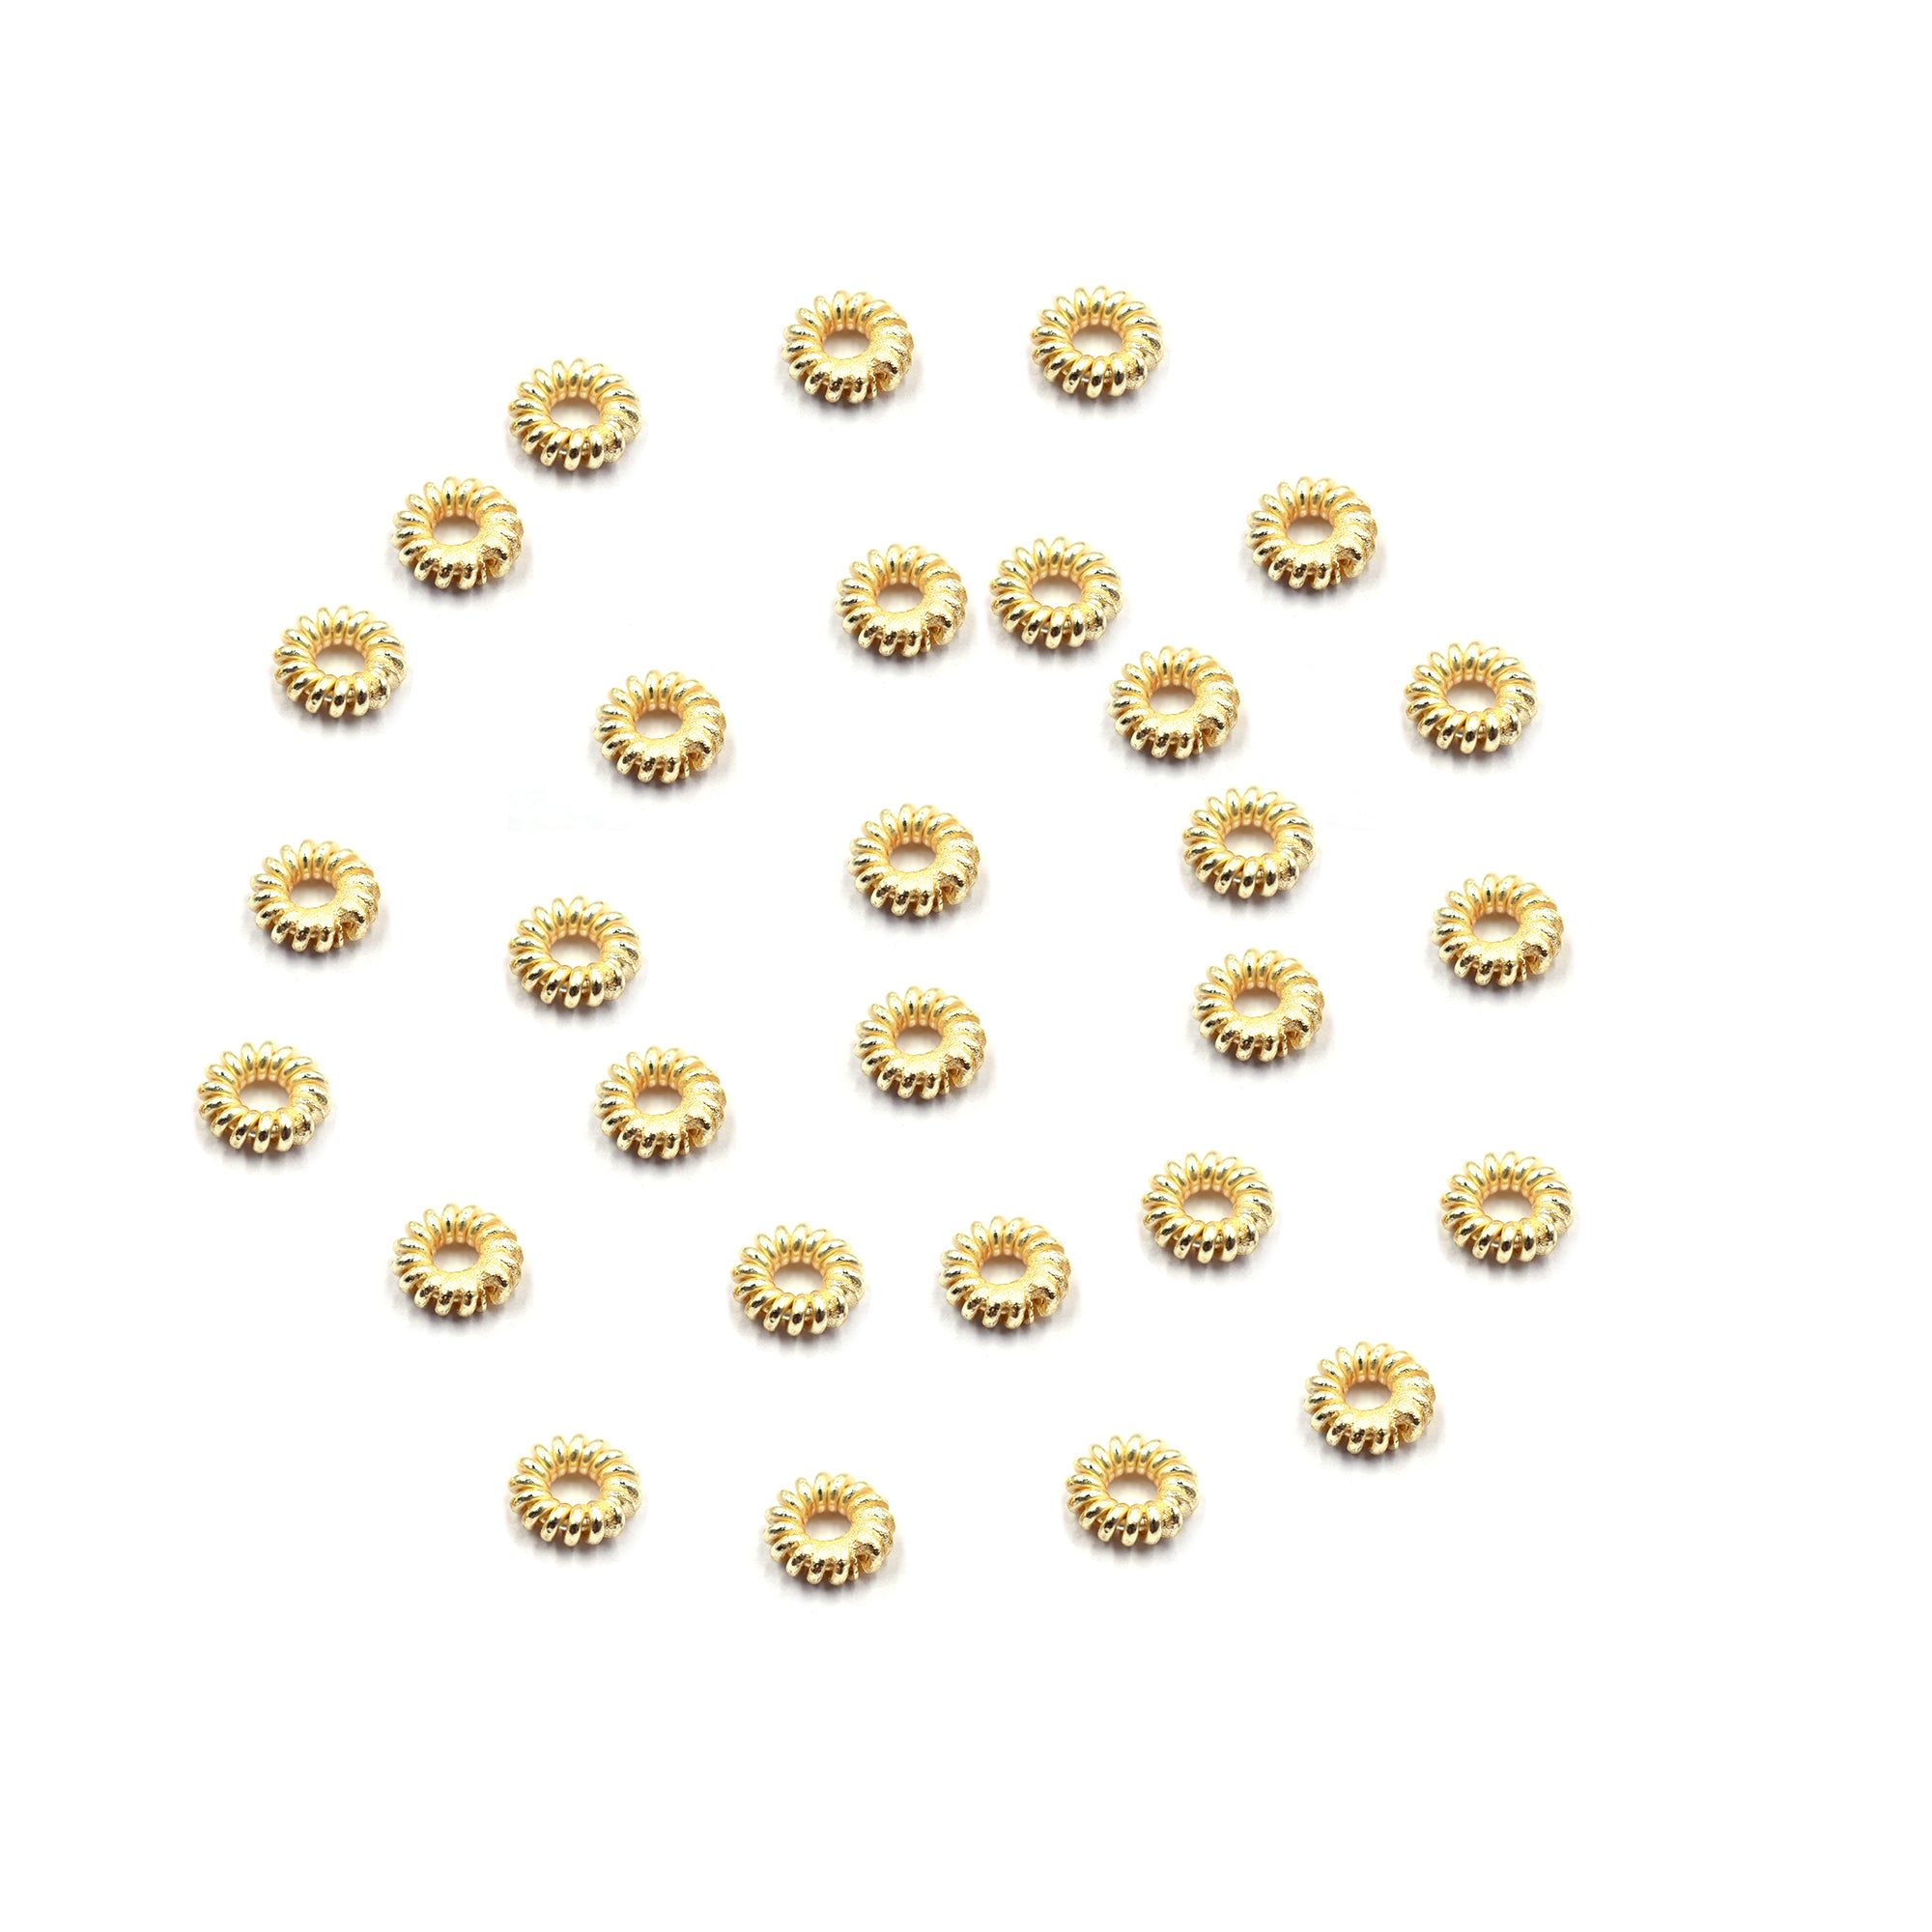 60 Pcs 6mm Twisted Wire Jump Ring Gold Plated Copper